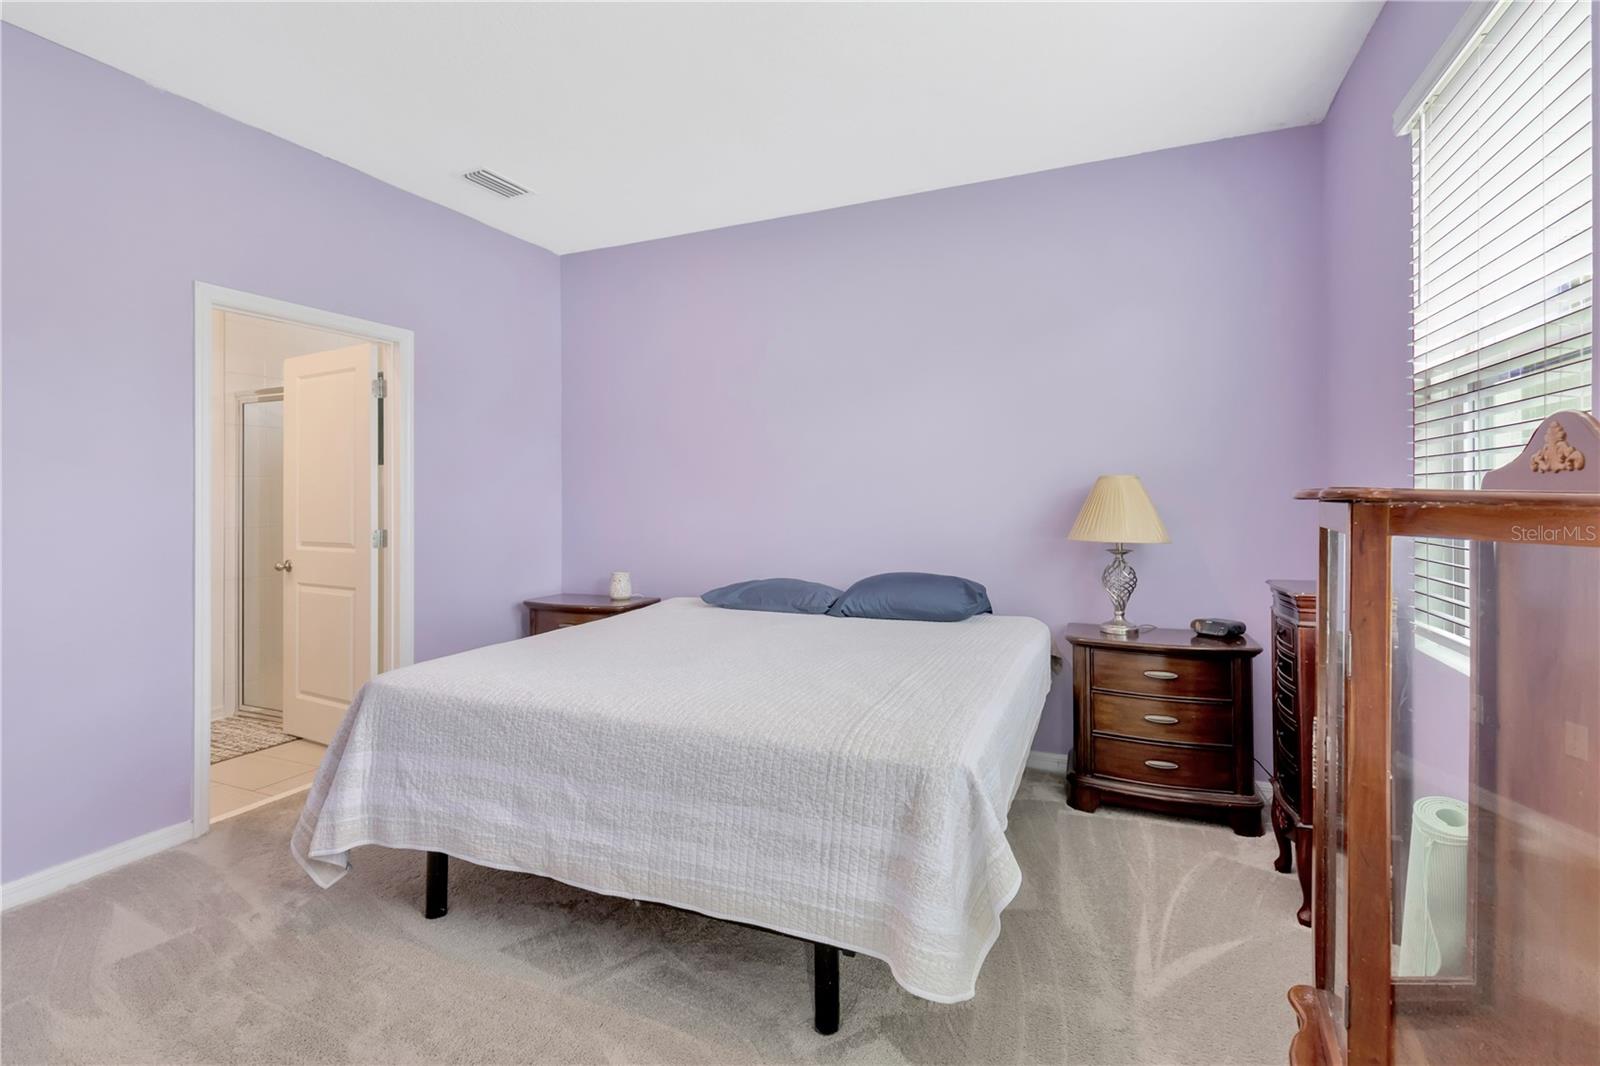 Primary bedroom with large walk-in closet is located downstairs